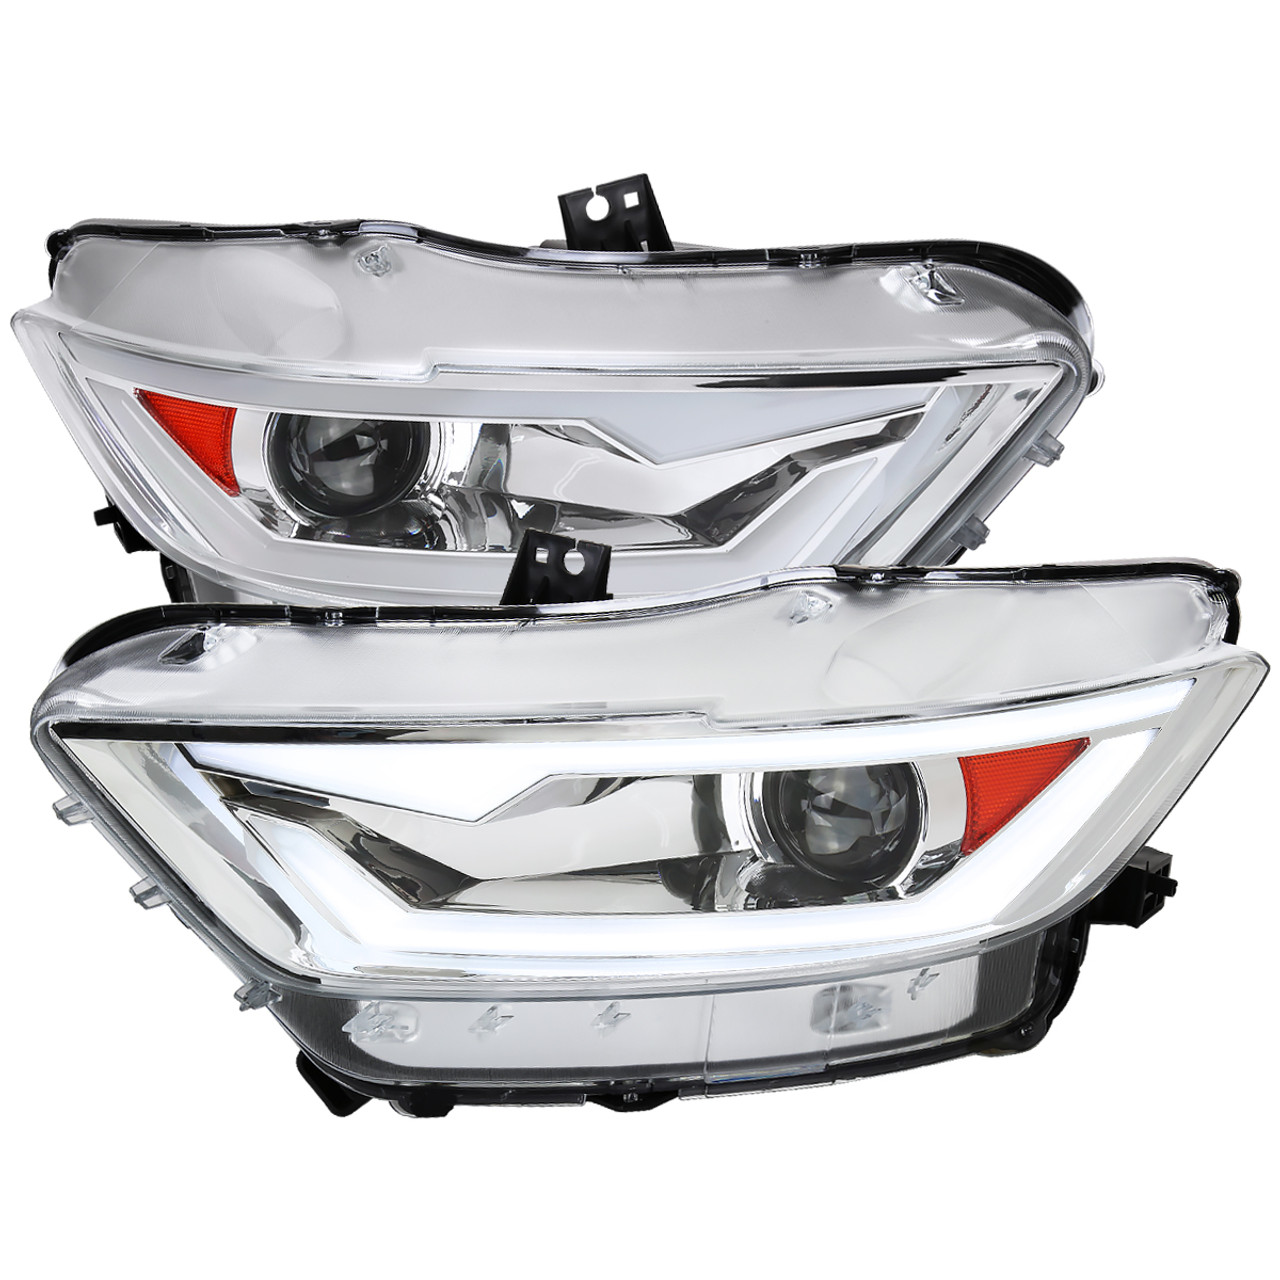 2015-2017 Ford Mustang HID/Xenon Switchback Sequential LED Turn Signal Projector Headlights (Chrome Housing/Clear Lens)